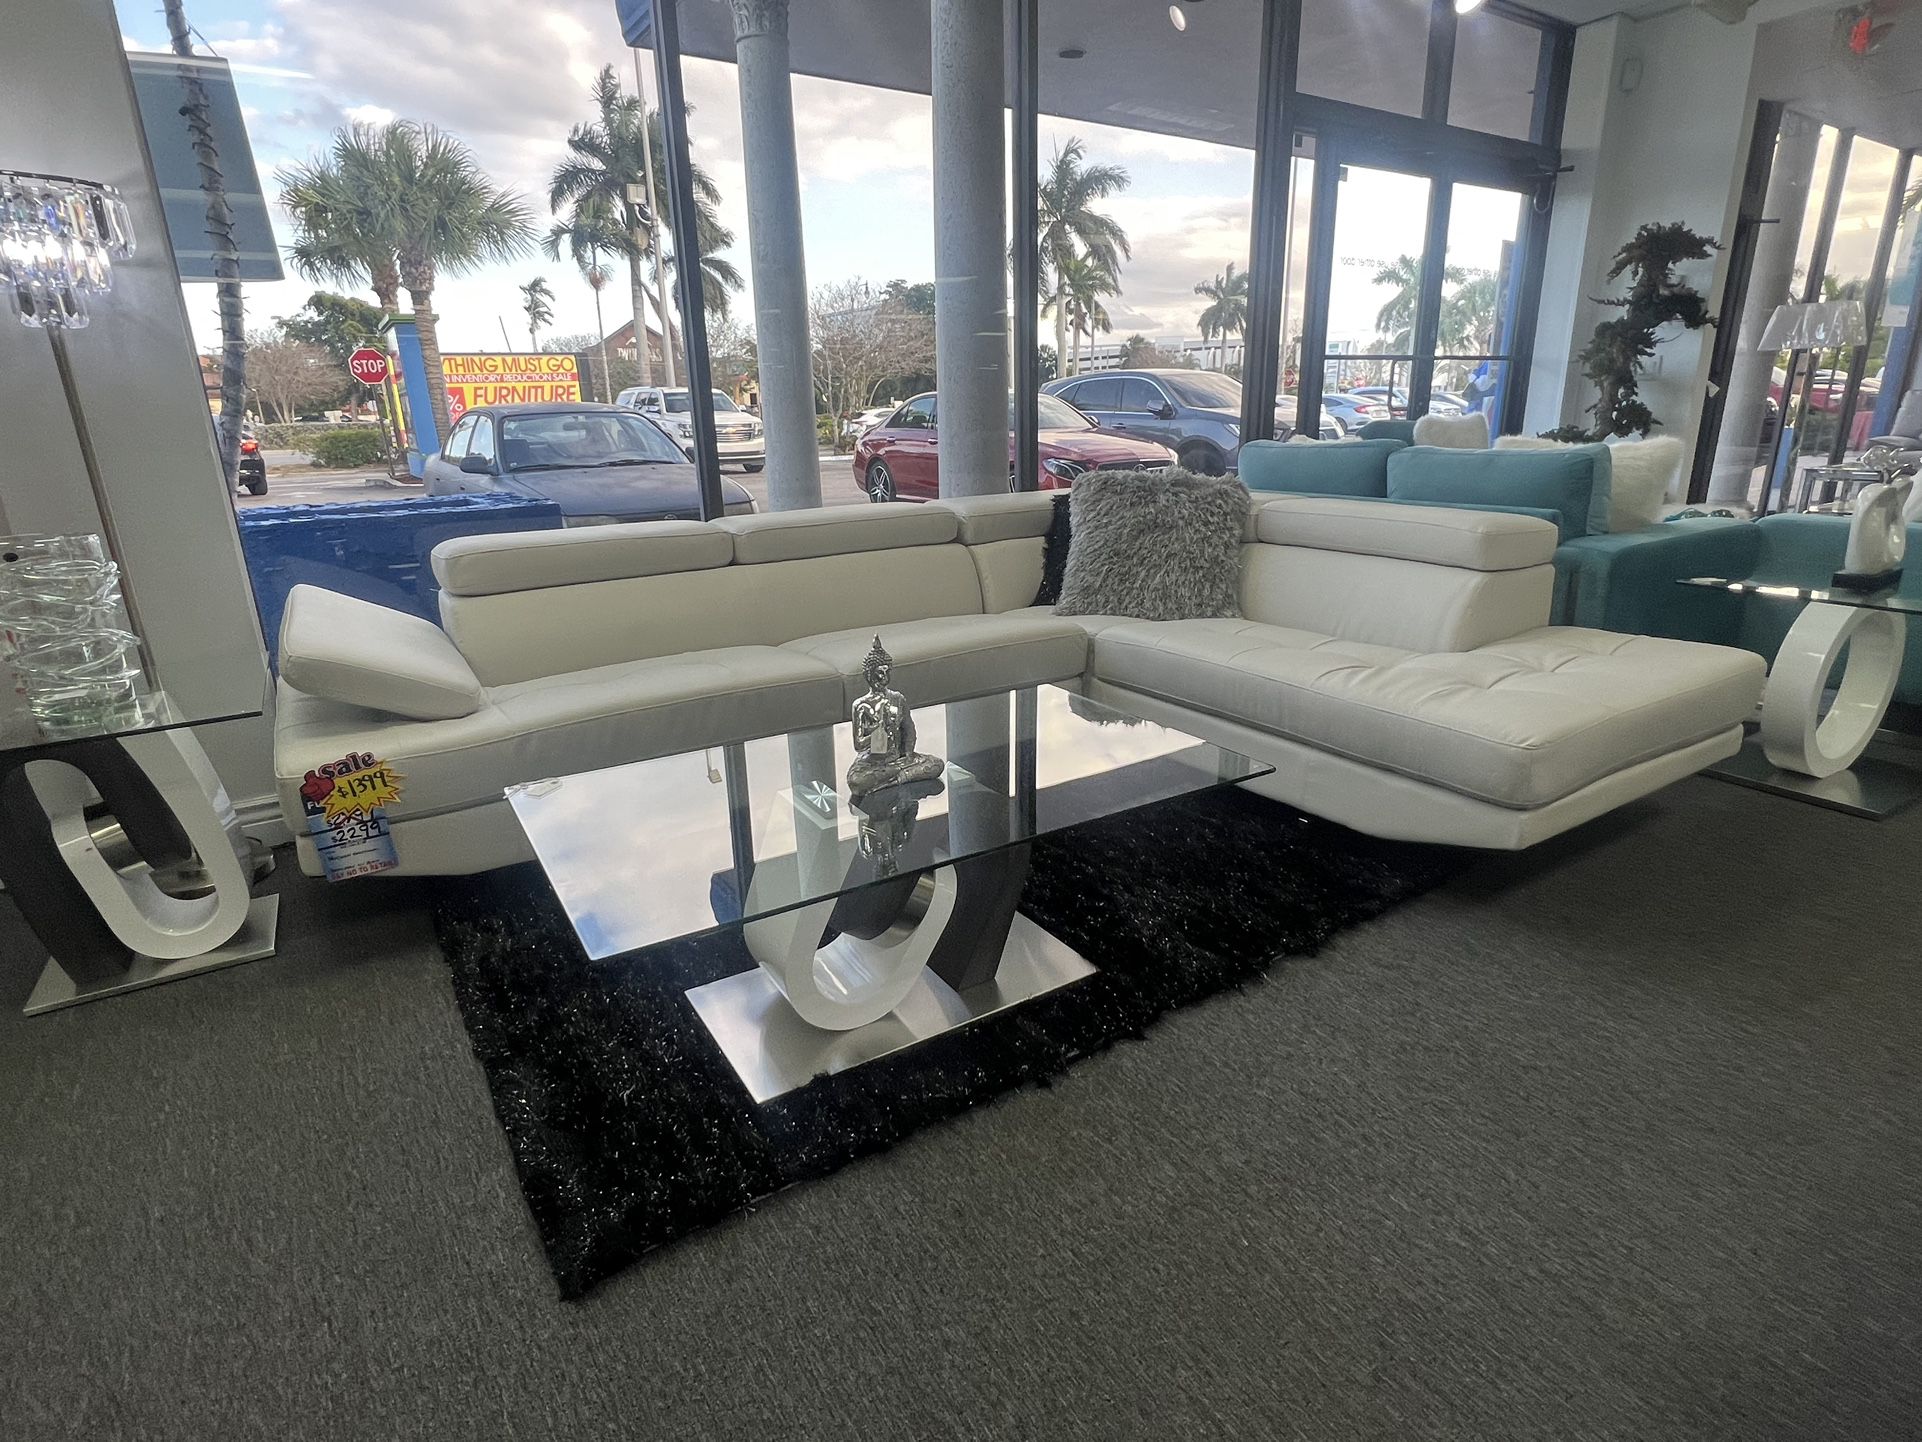 🔥Beautiful modem L shape sectional available for only $1399